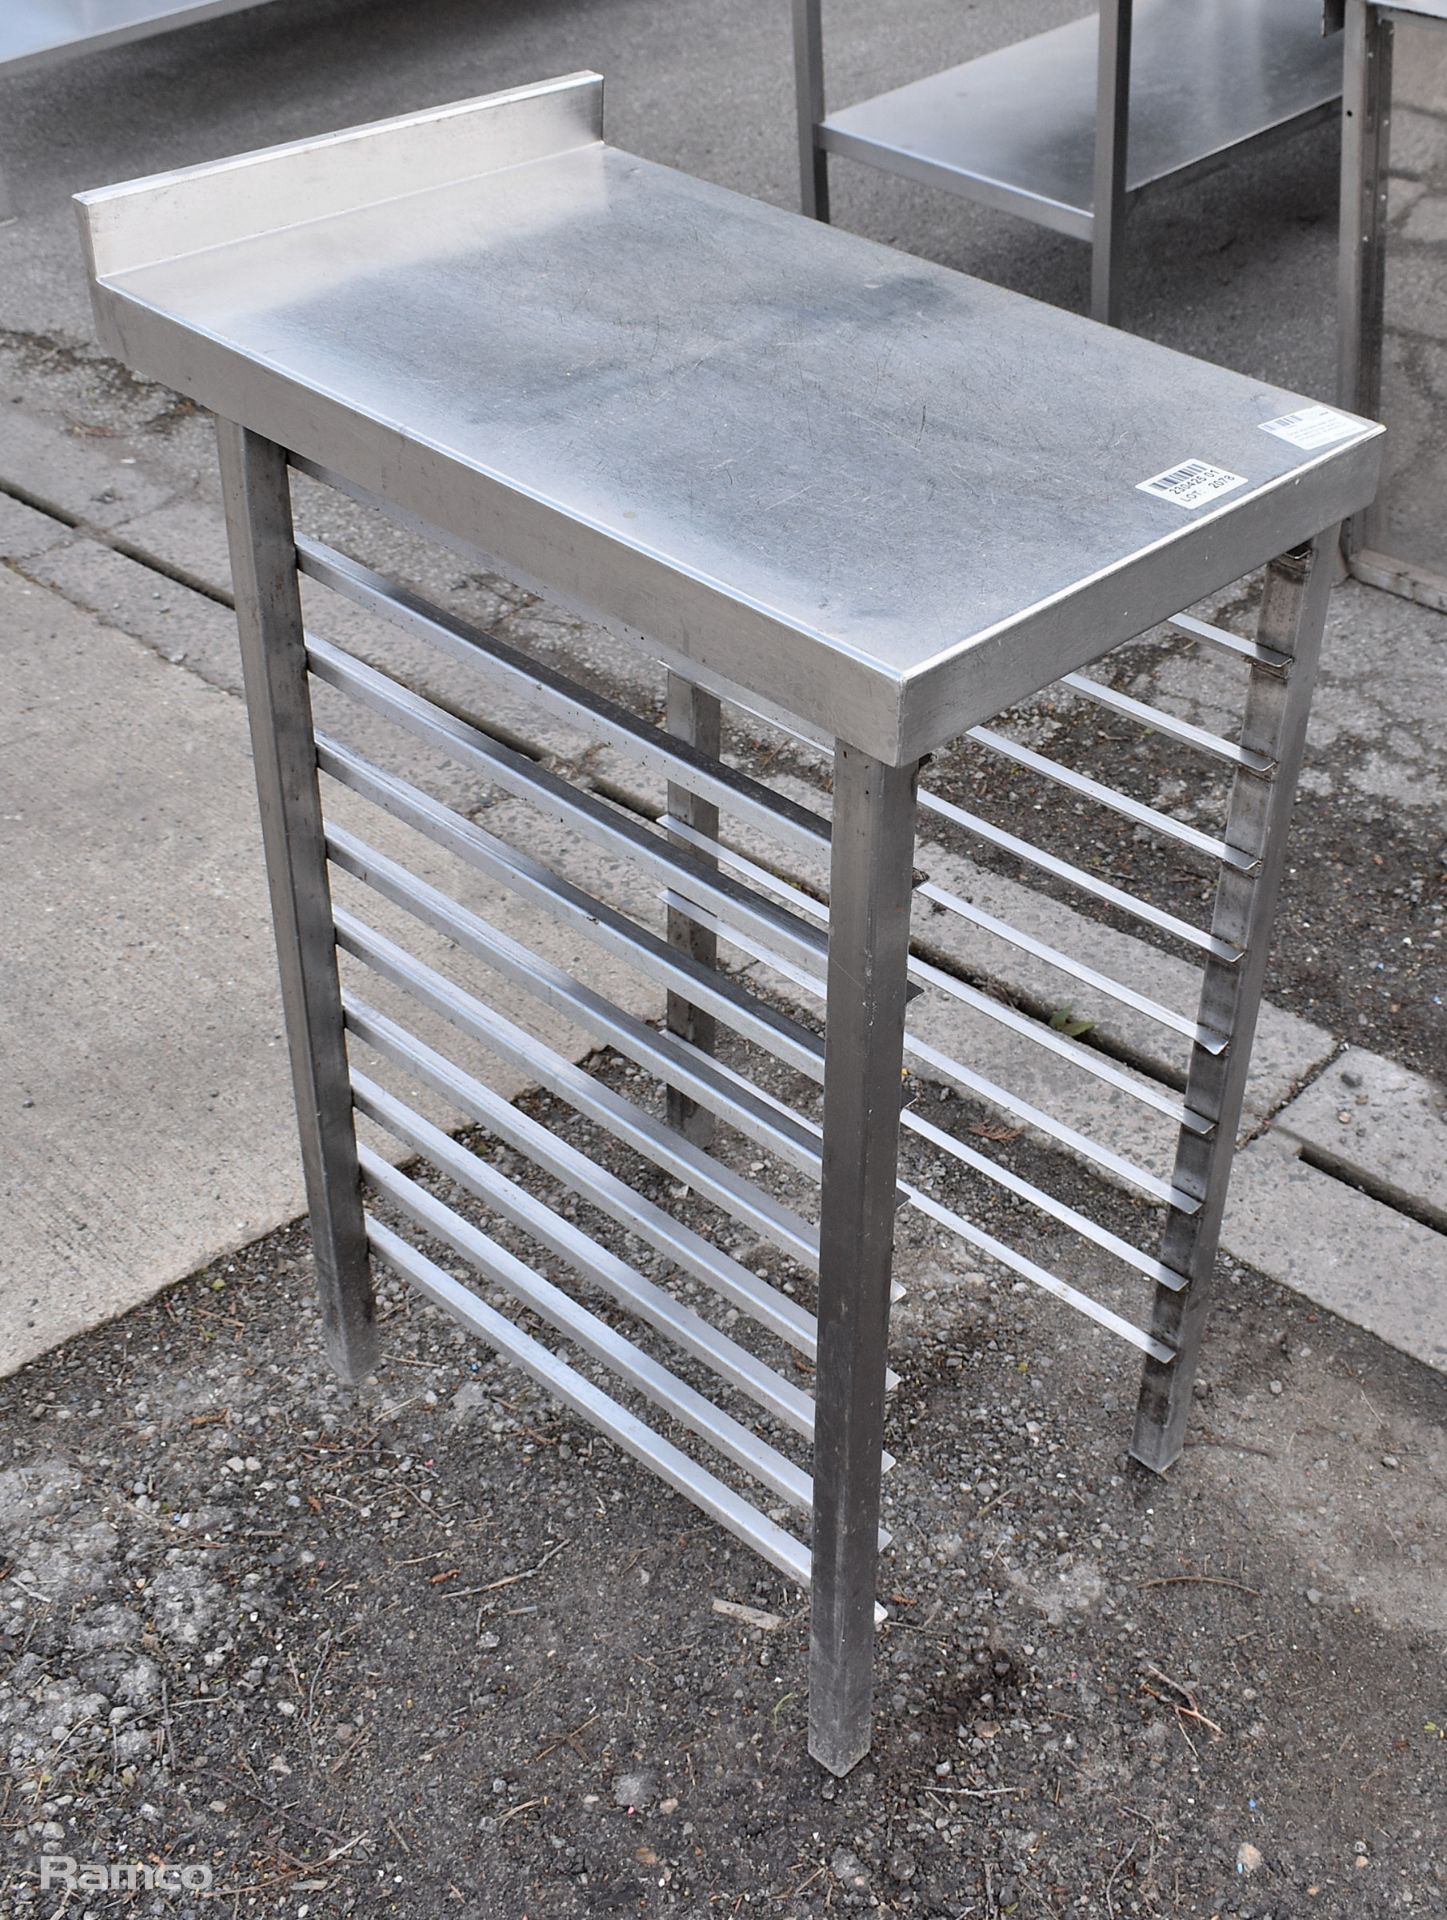 Small stainless steel table with serving tray racking - dimensions: 40 x 65 x 90cm - Image 2 of 3